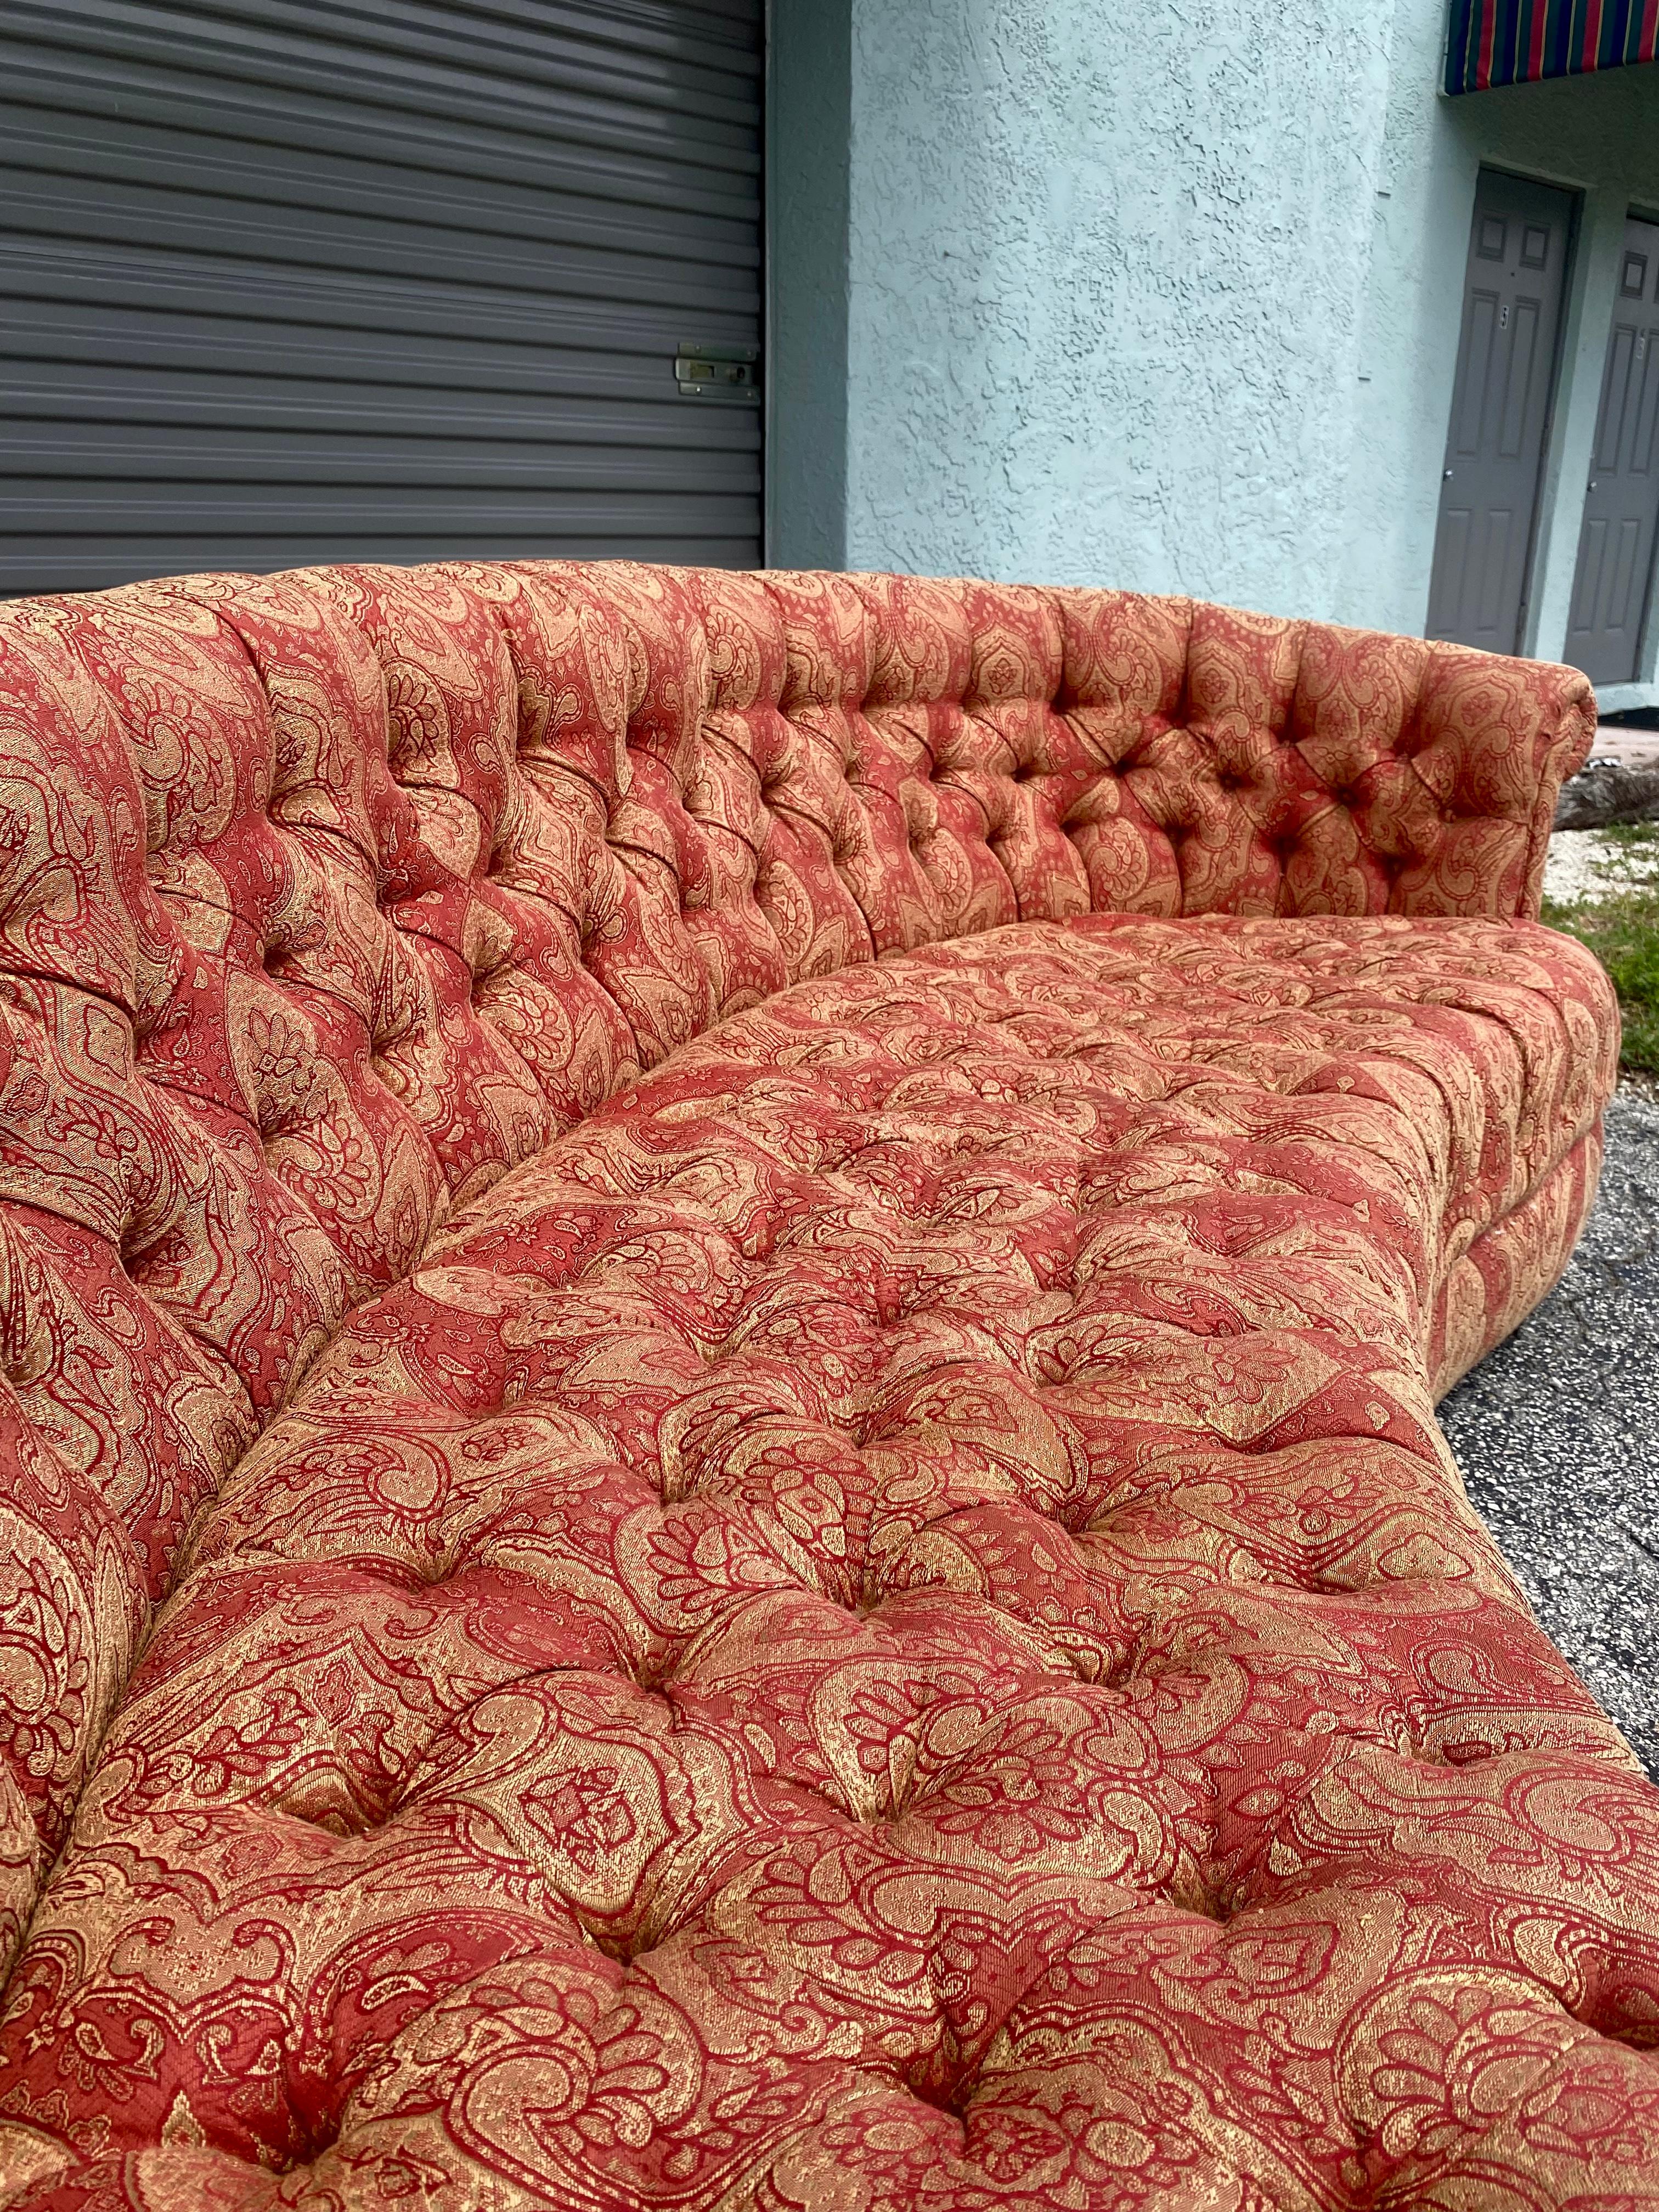 1960s Mid Century Curved Tufted Paisley Chesterfield Kidney Sofa For Sale 4